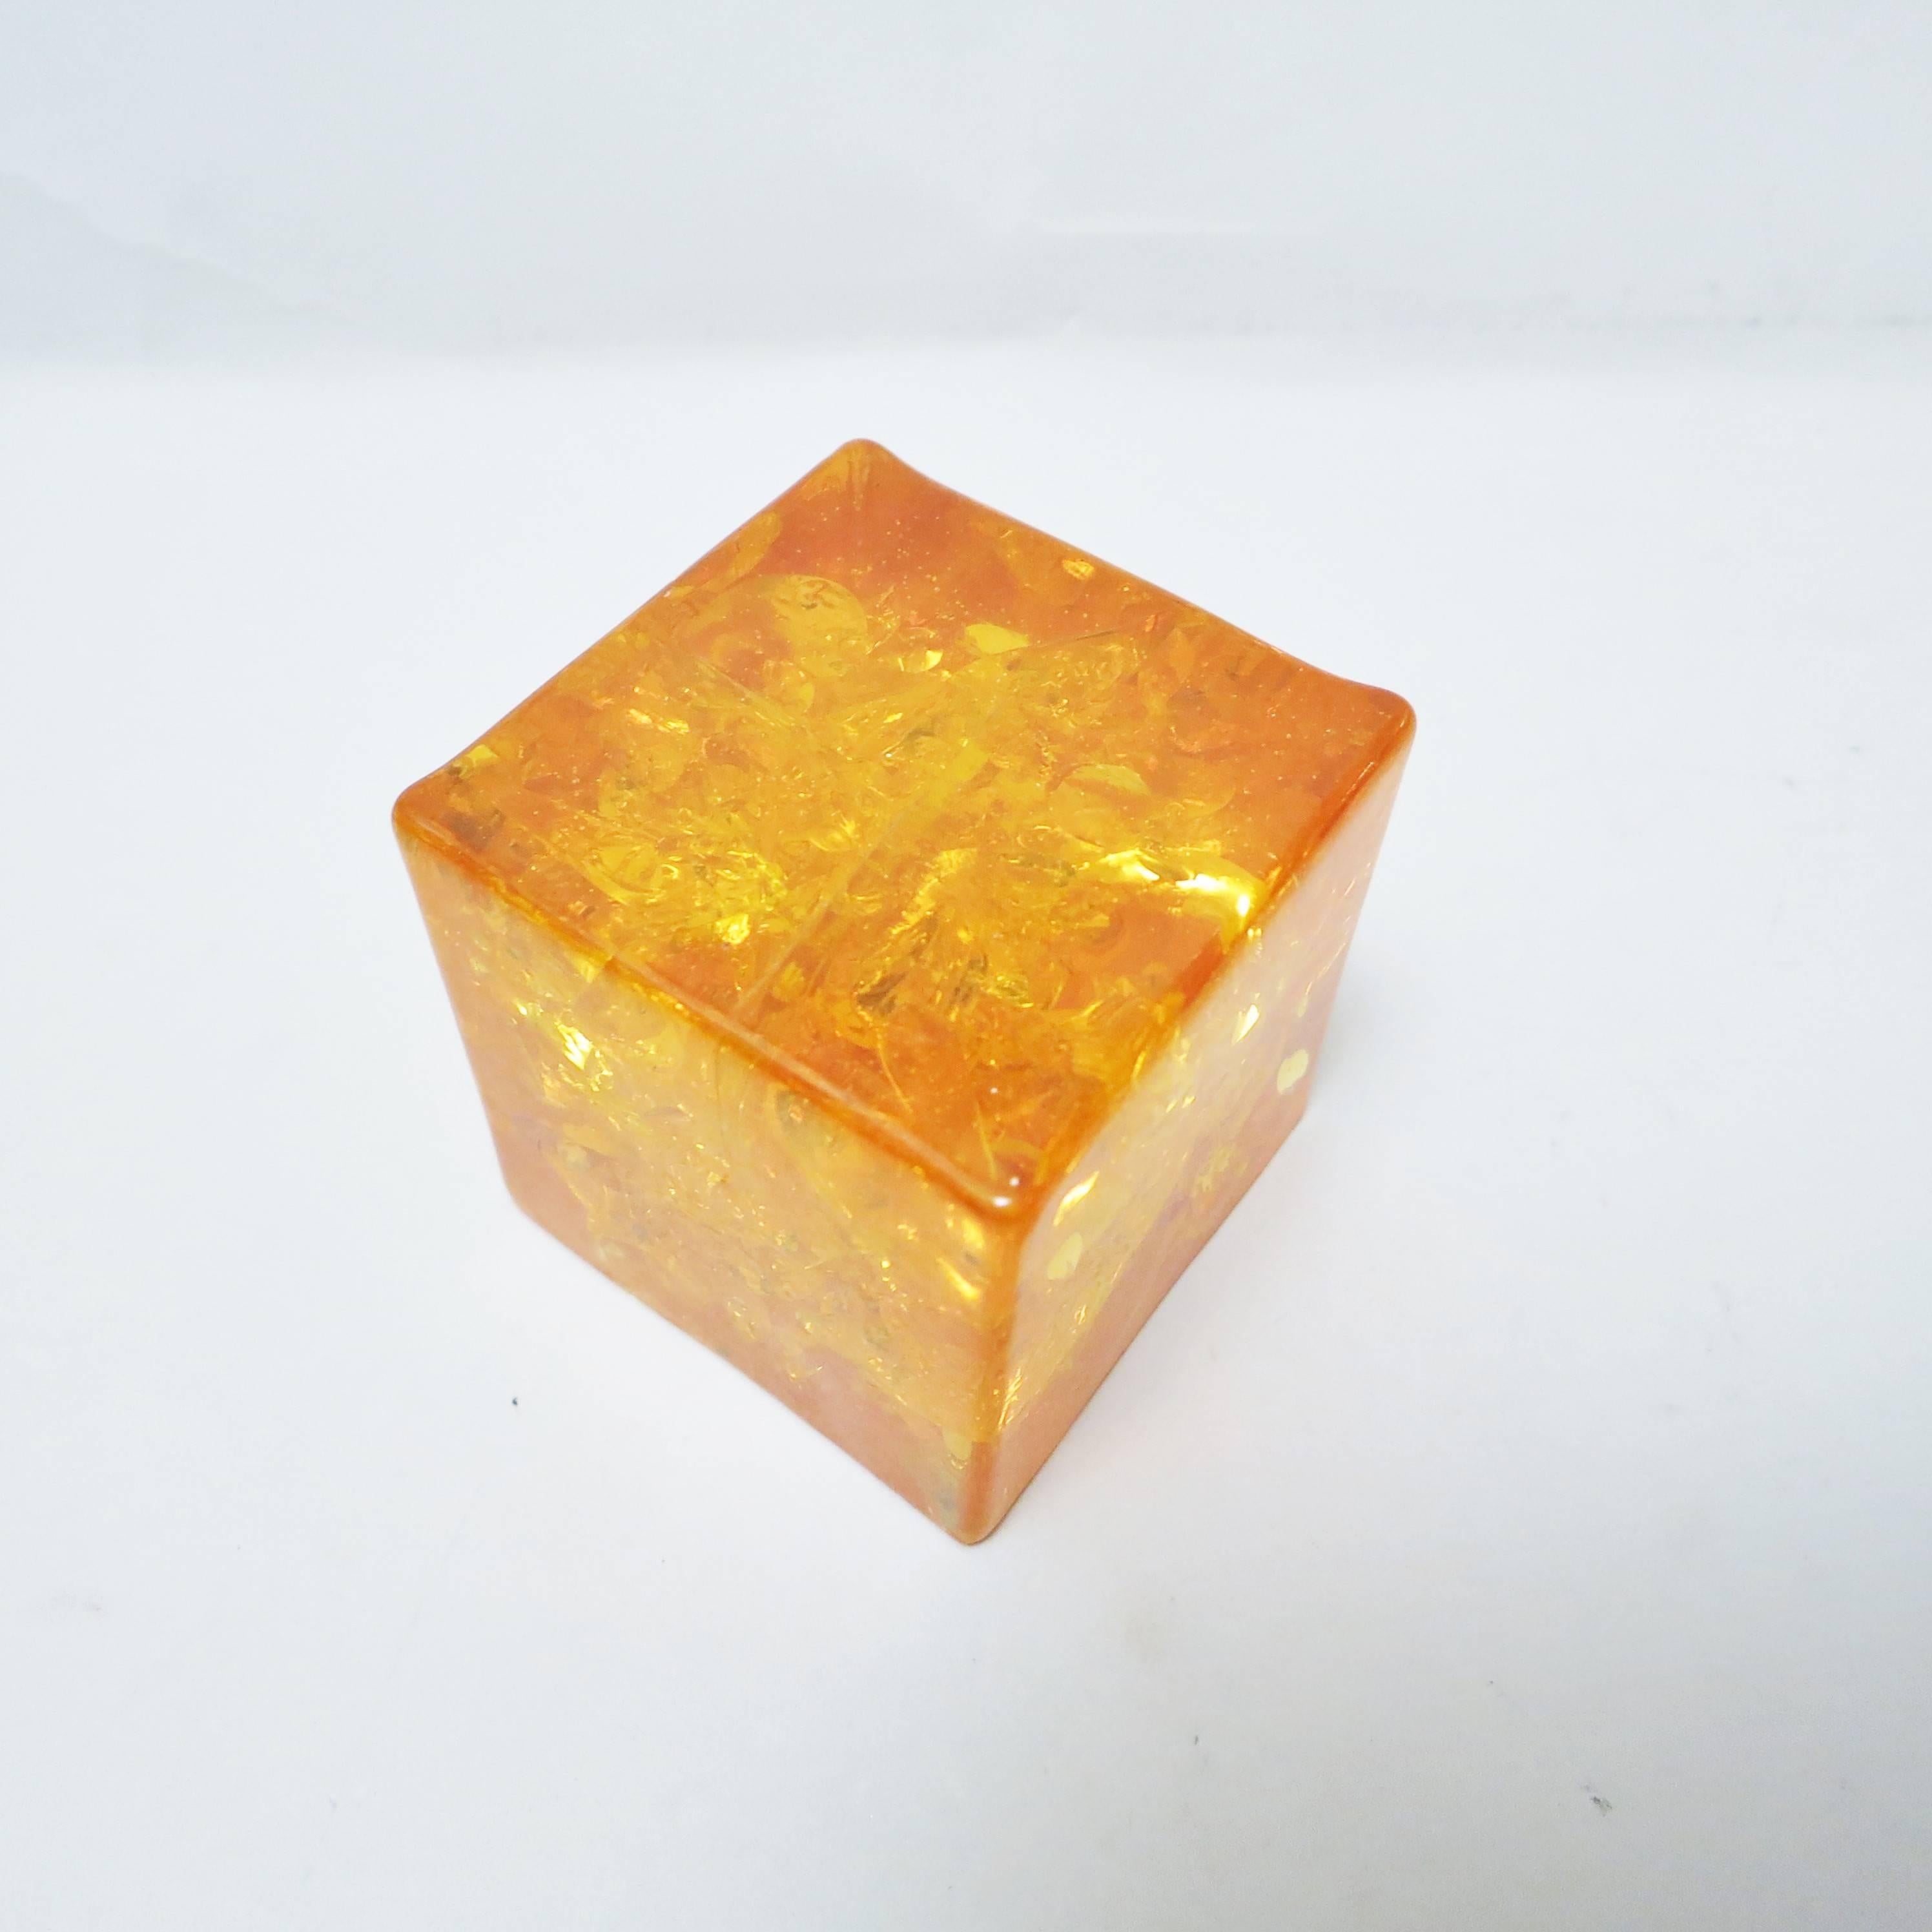 Interesting sculpture cube in orange fractal resin attributed to French artist Pierre Giraudon, circa 1970
handmade, unique piece.